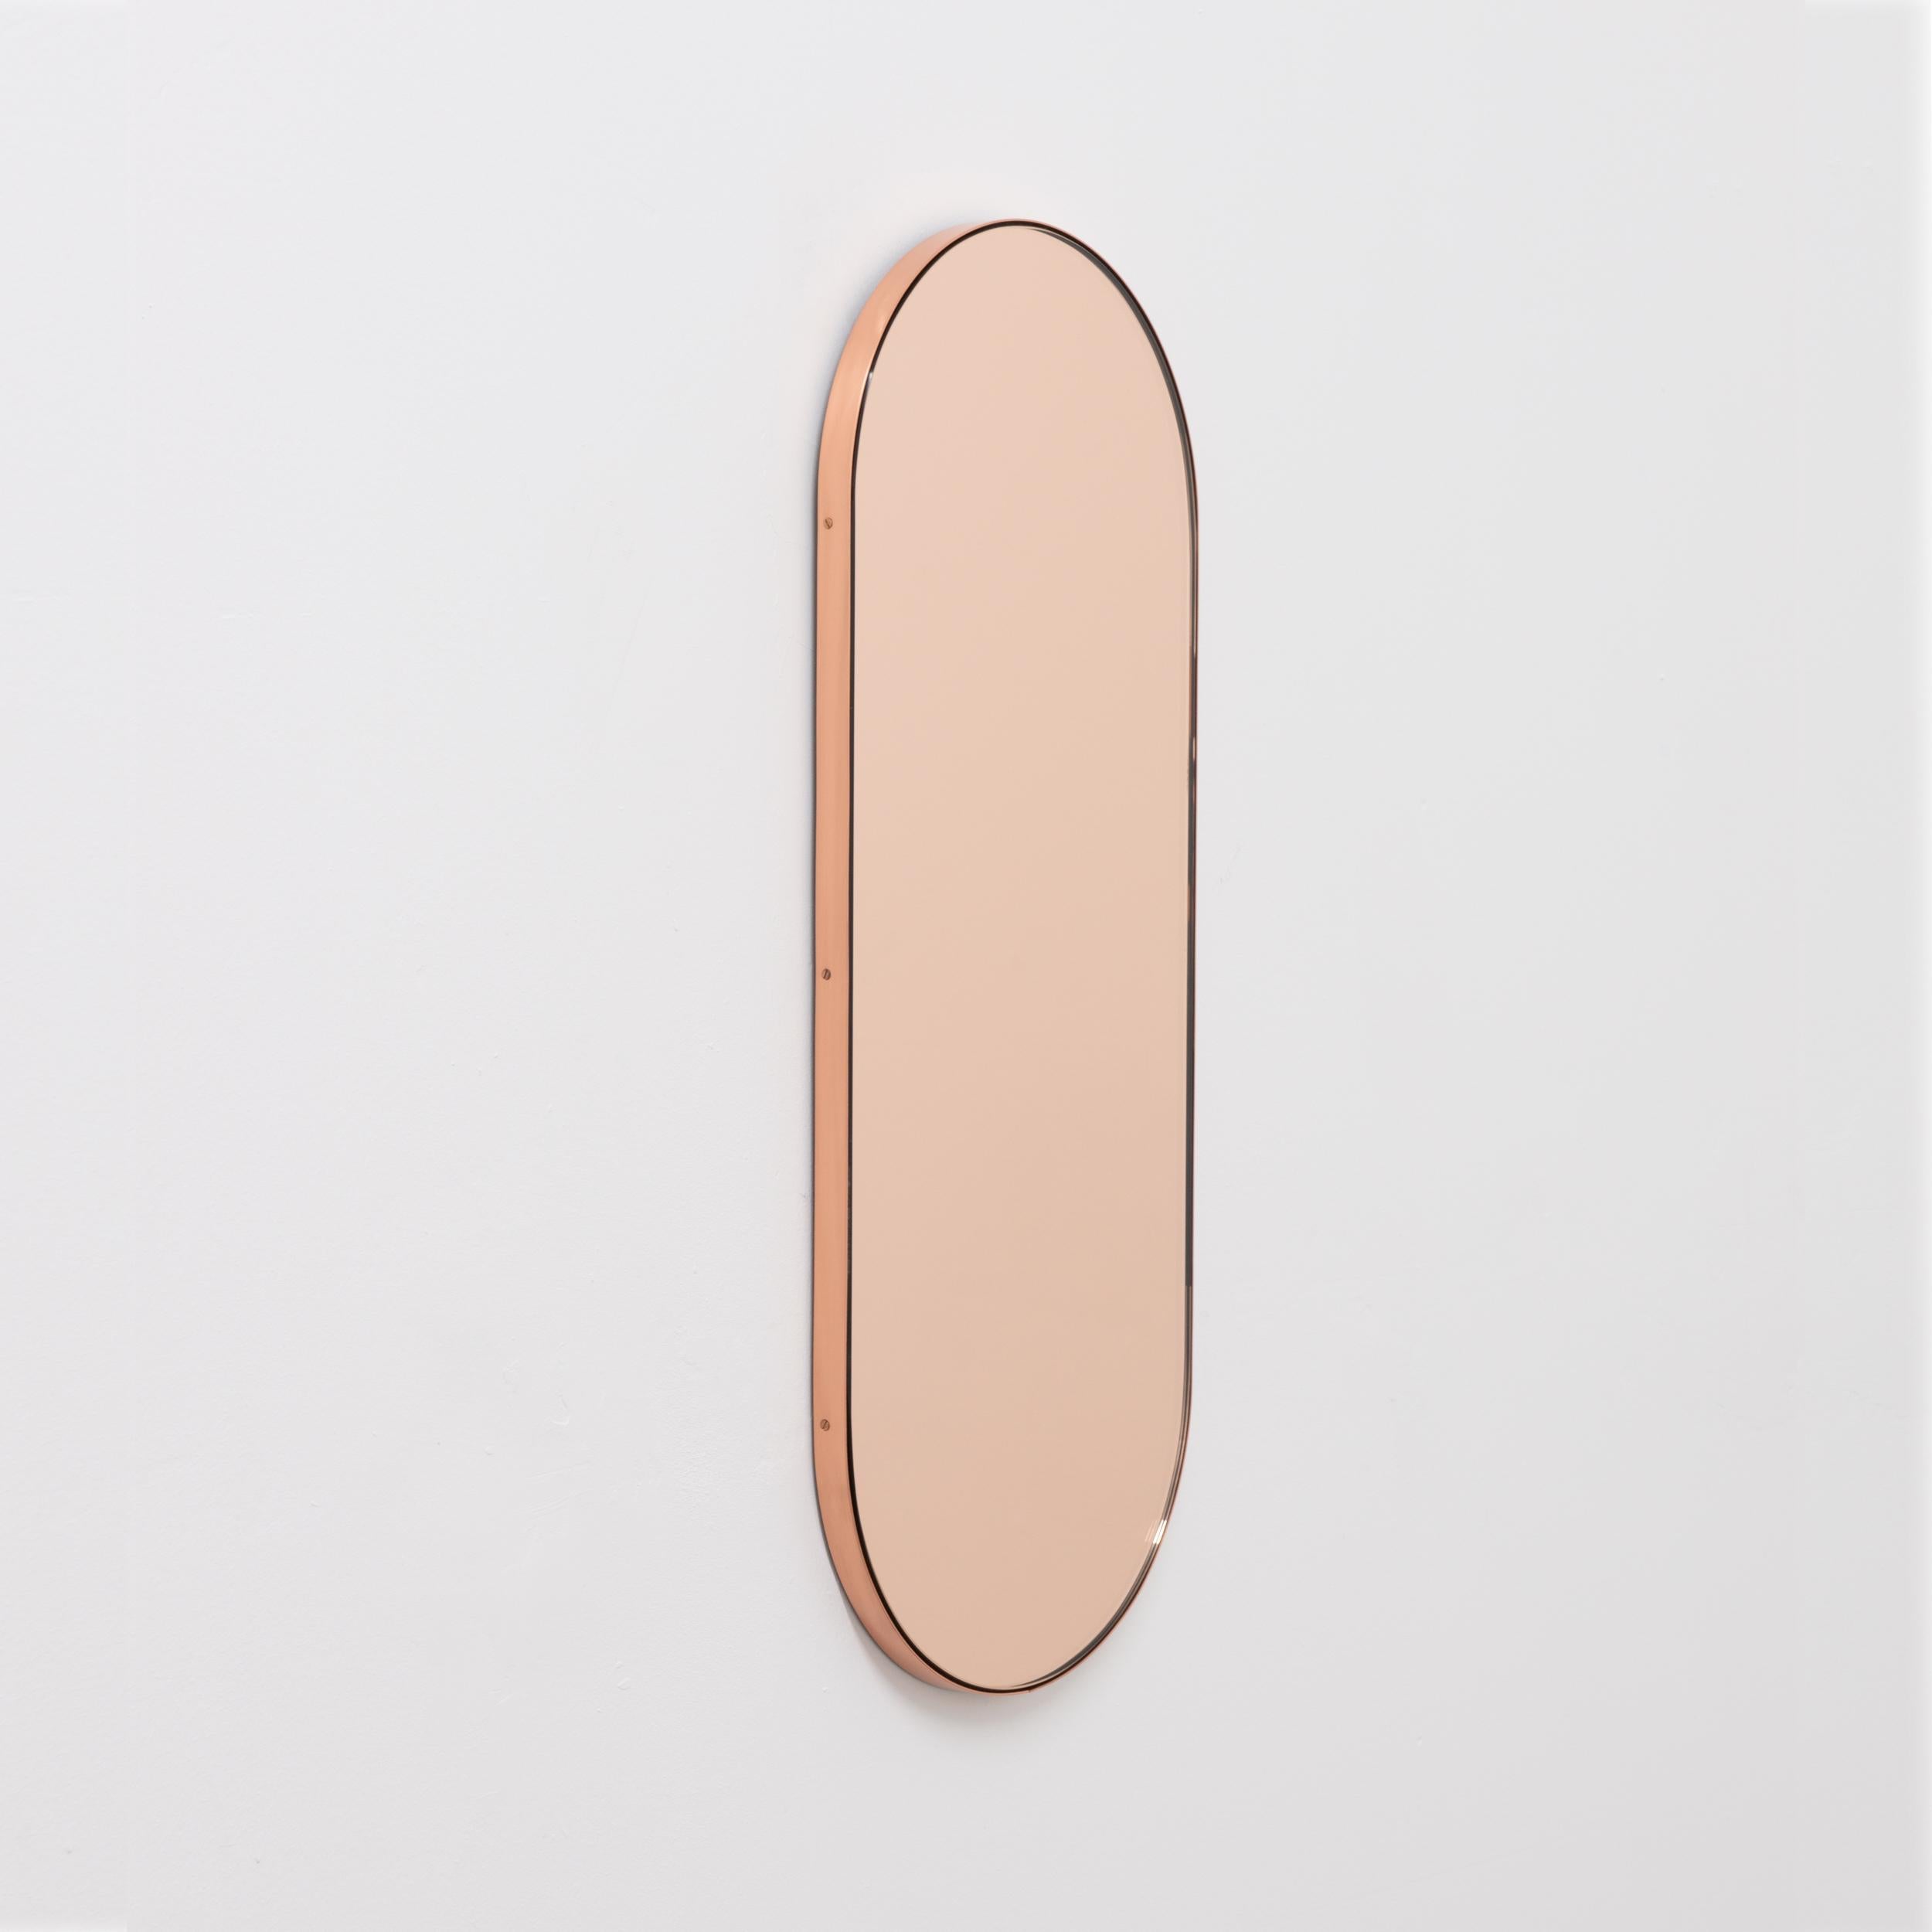 Contemporary capsule shaped rose gold or peach mirror with an elegant copper frame. Designed and handcrafted in London, UK. The detailing and finish, including visible copper-plated screws, emphasise the craft and quality feel of the mirror, a true